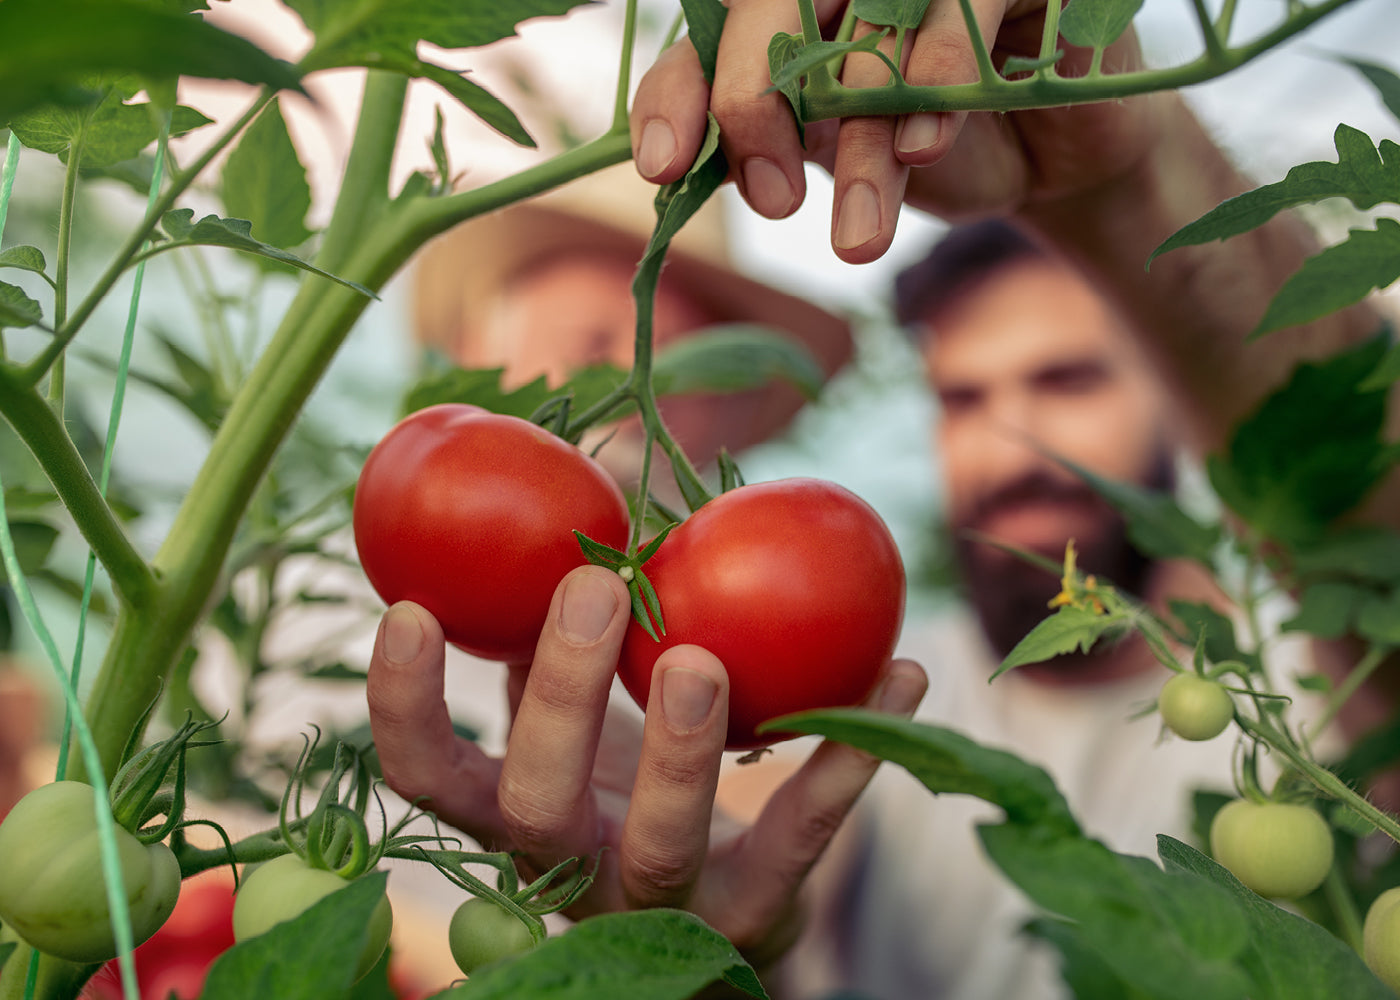 A person holding two tomatoes on the vine